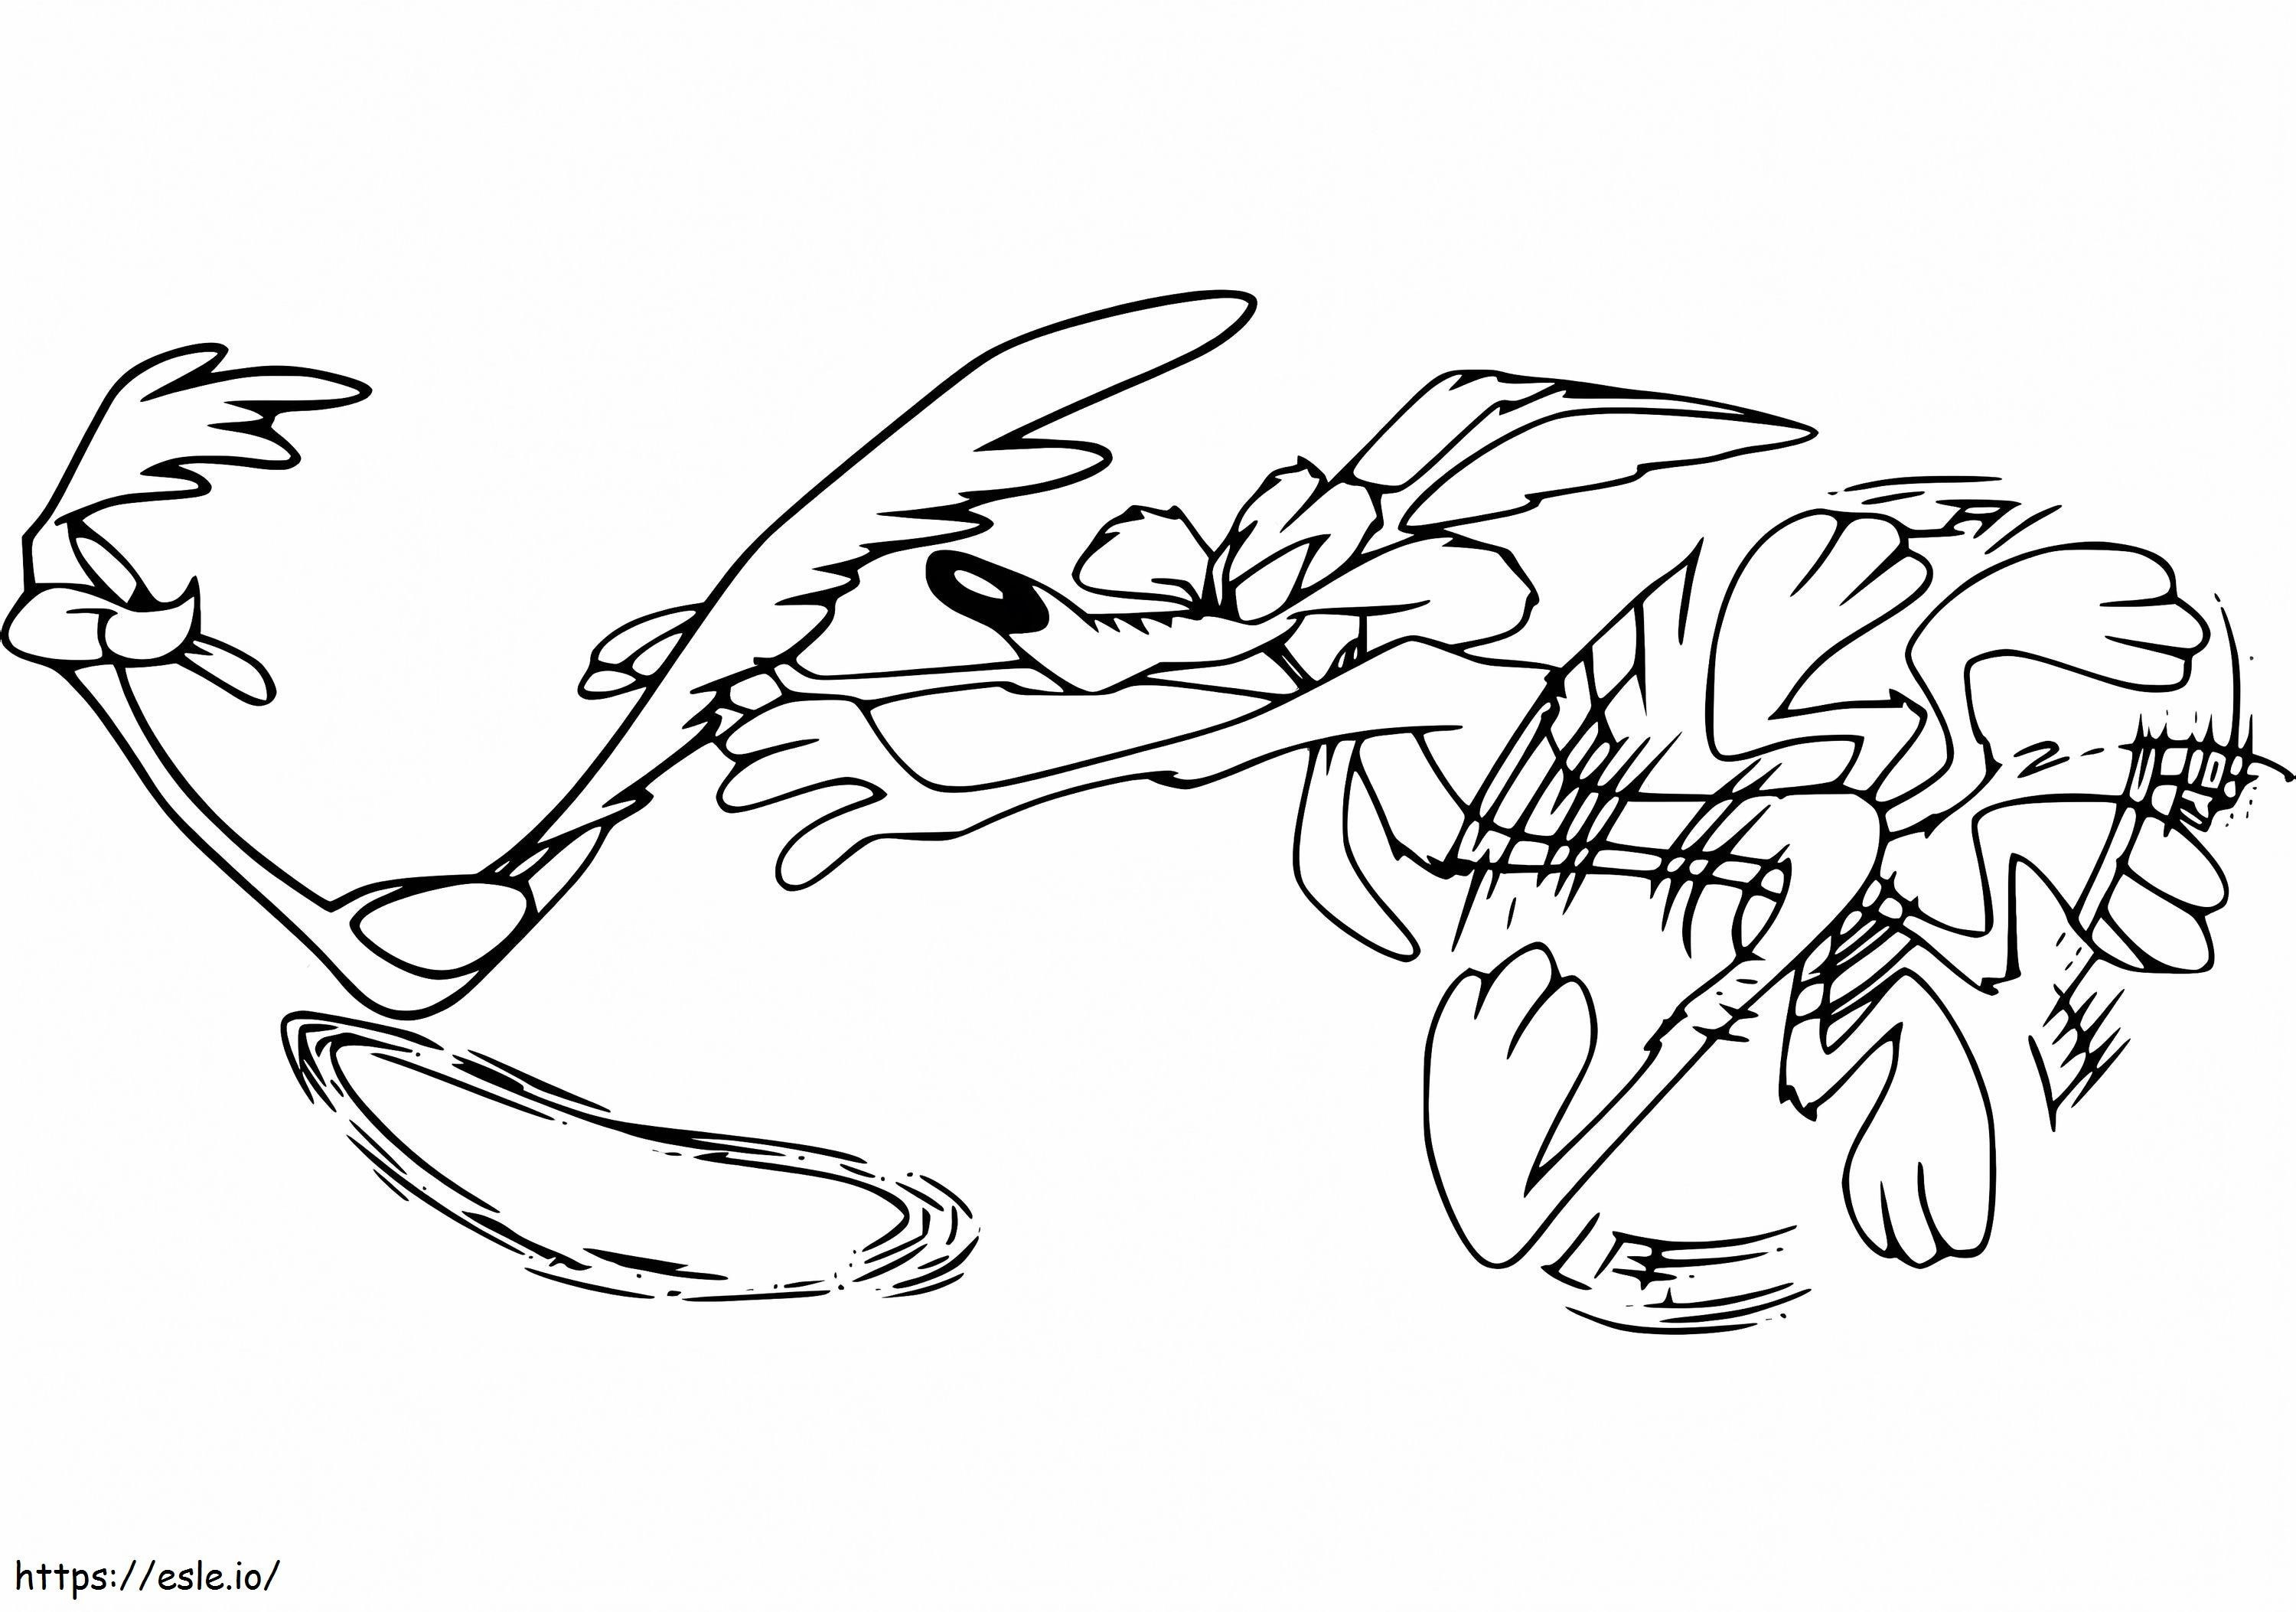 Road Runner With Wile E Coyote coloring page